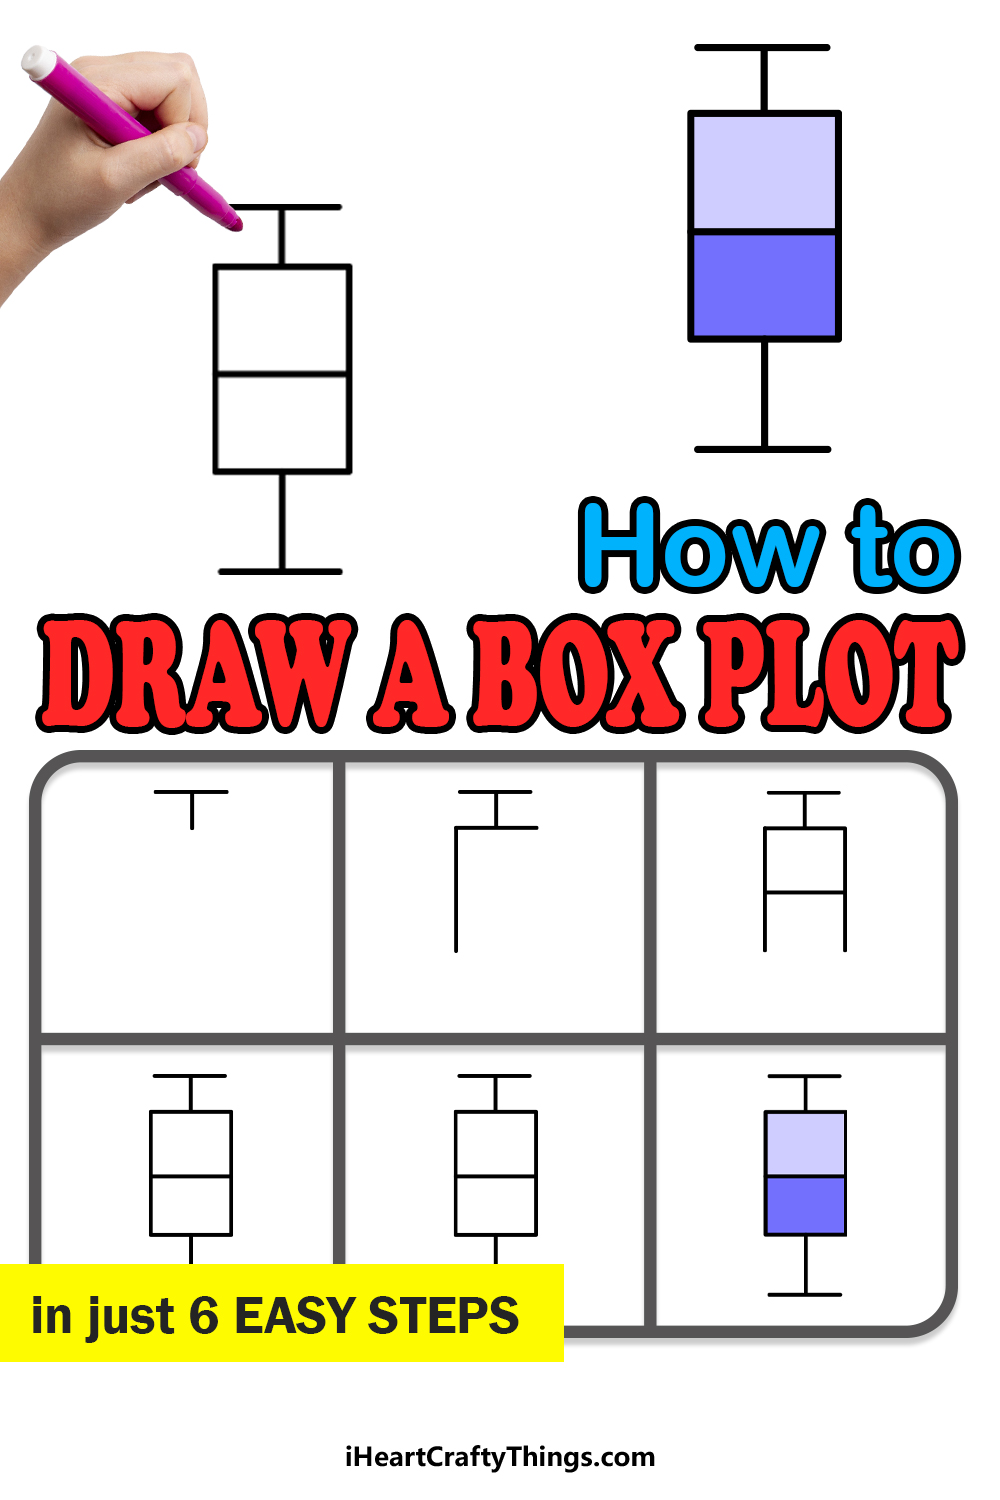 How to Draw A Box Plot in 6 easy steps